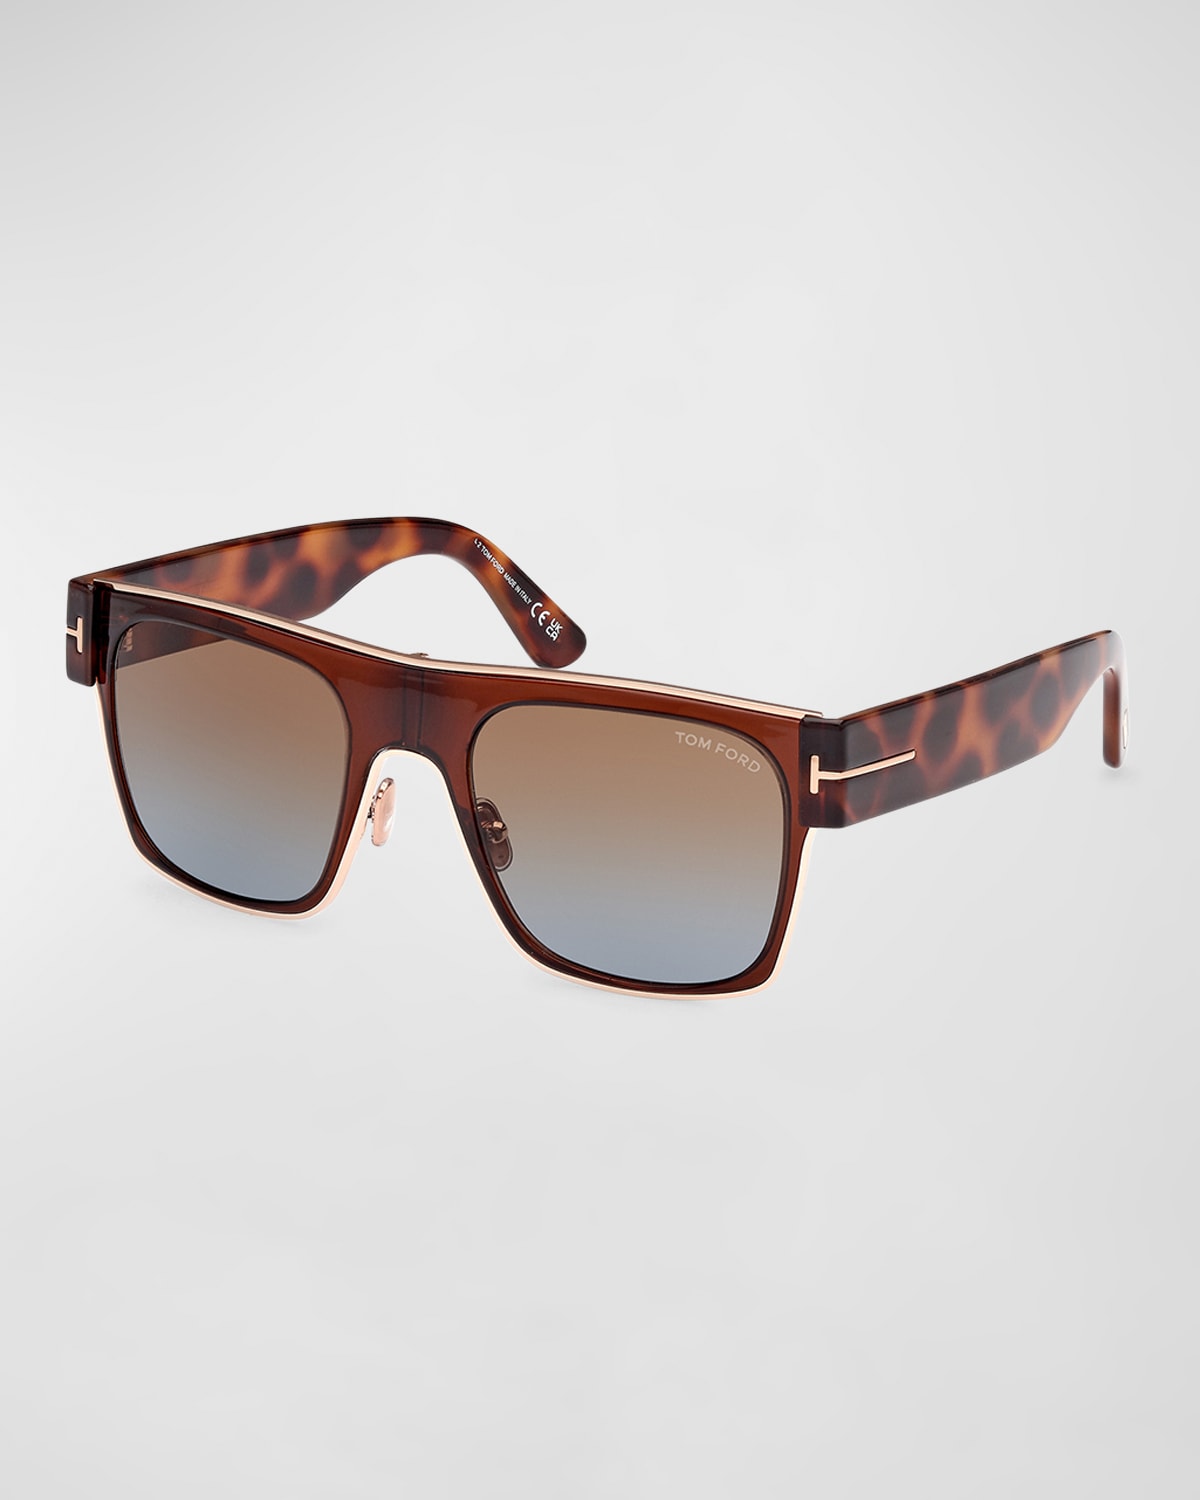 TOM FORD MEN'S EDWIN ACETATE AND METAL SQUARE SUNGLASSES